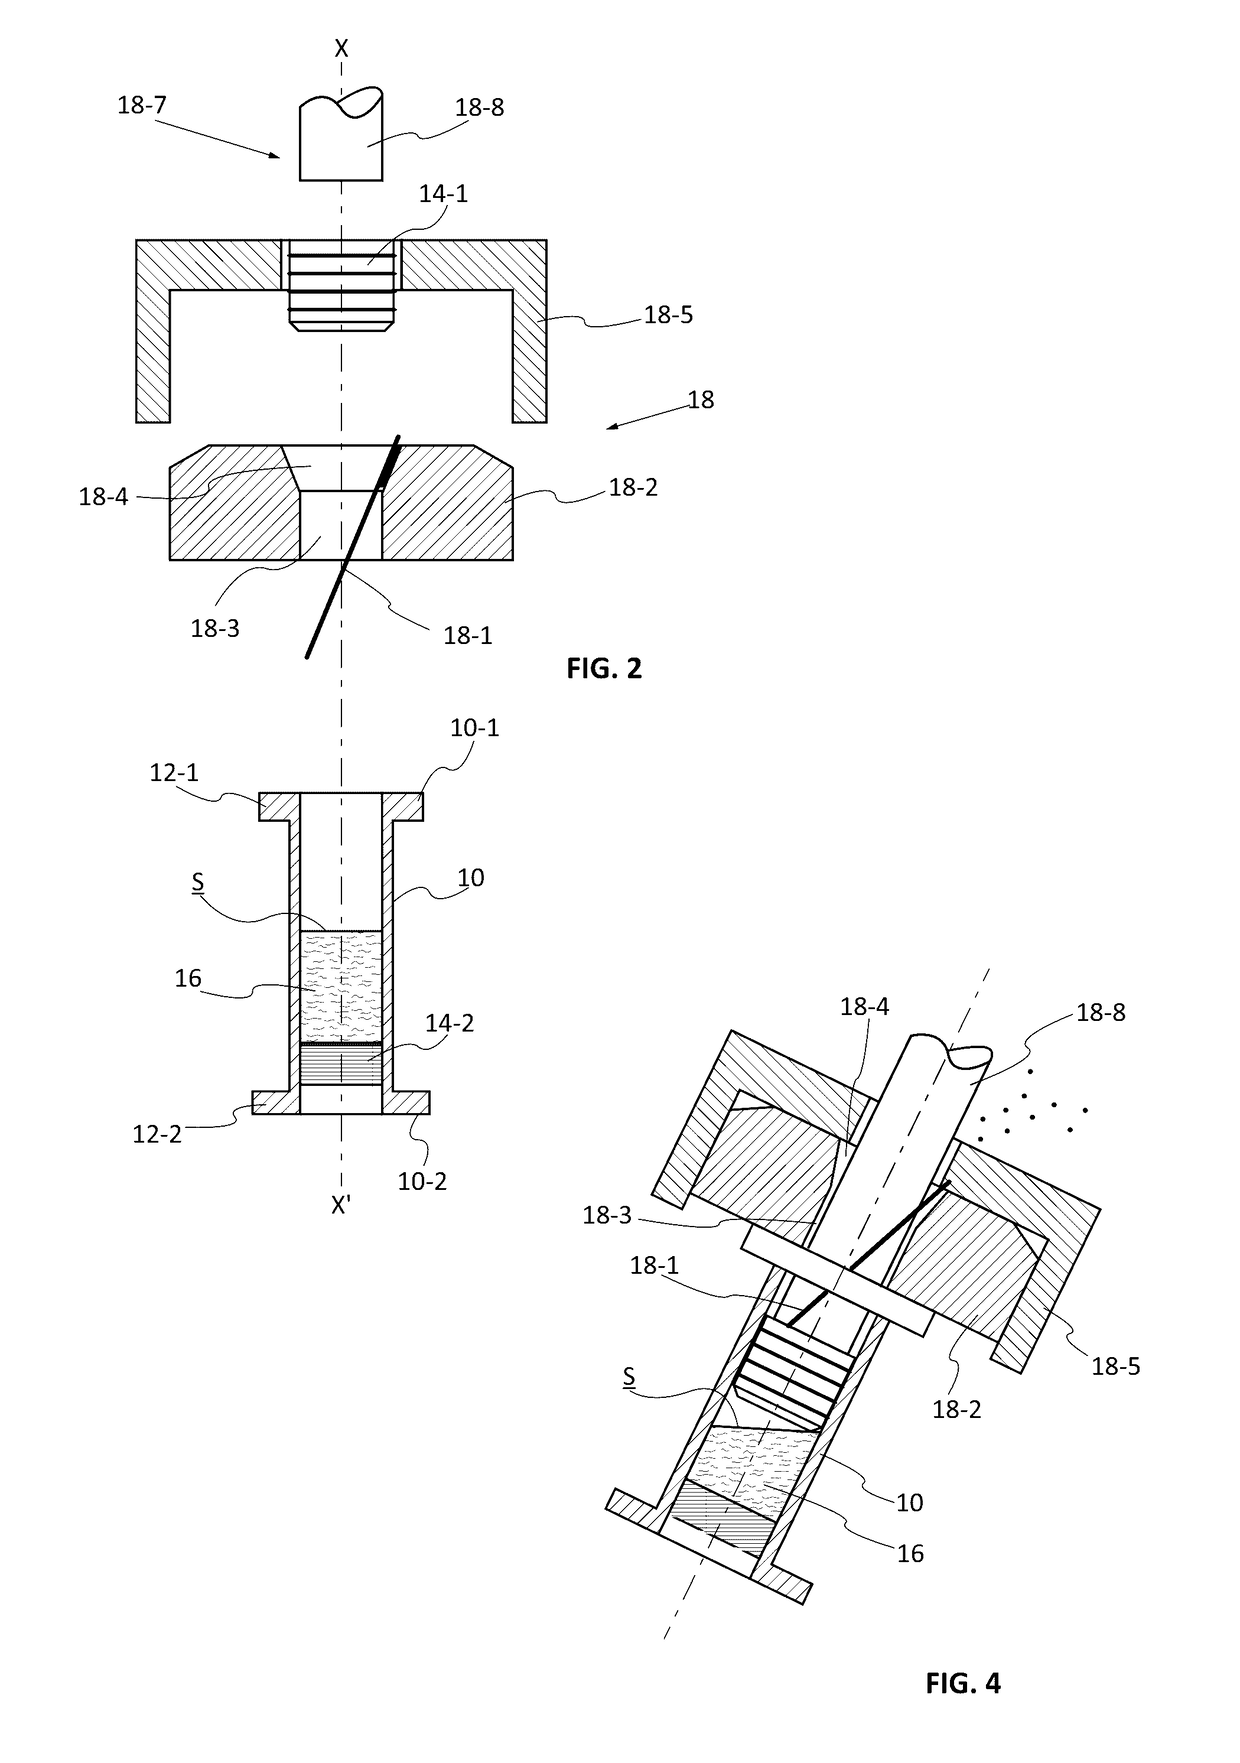 Method of sealing a container comprising  at least one plug, particularly a carpule, insertion means and associated sealing line